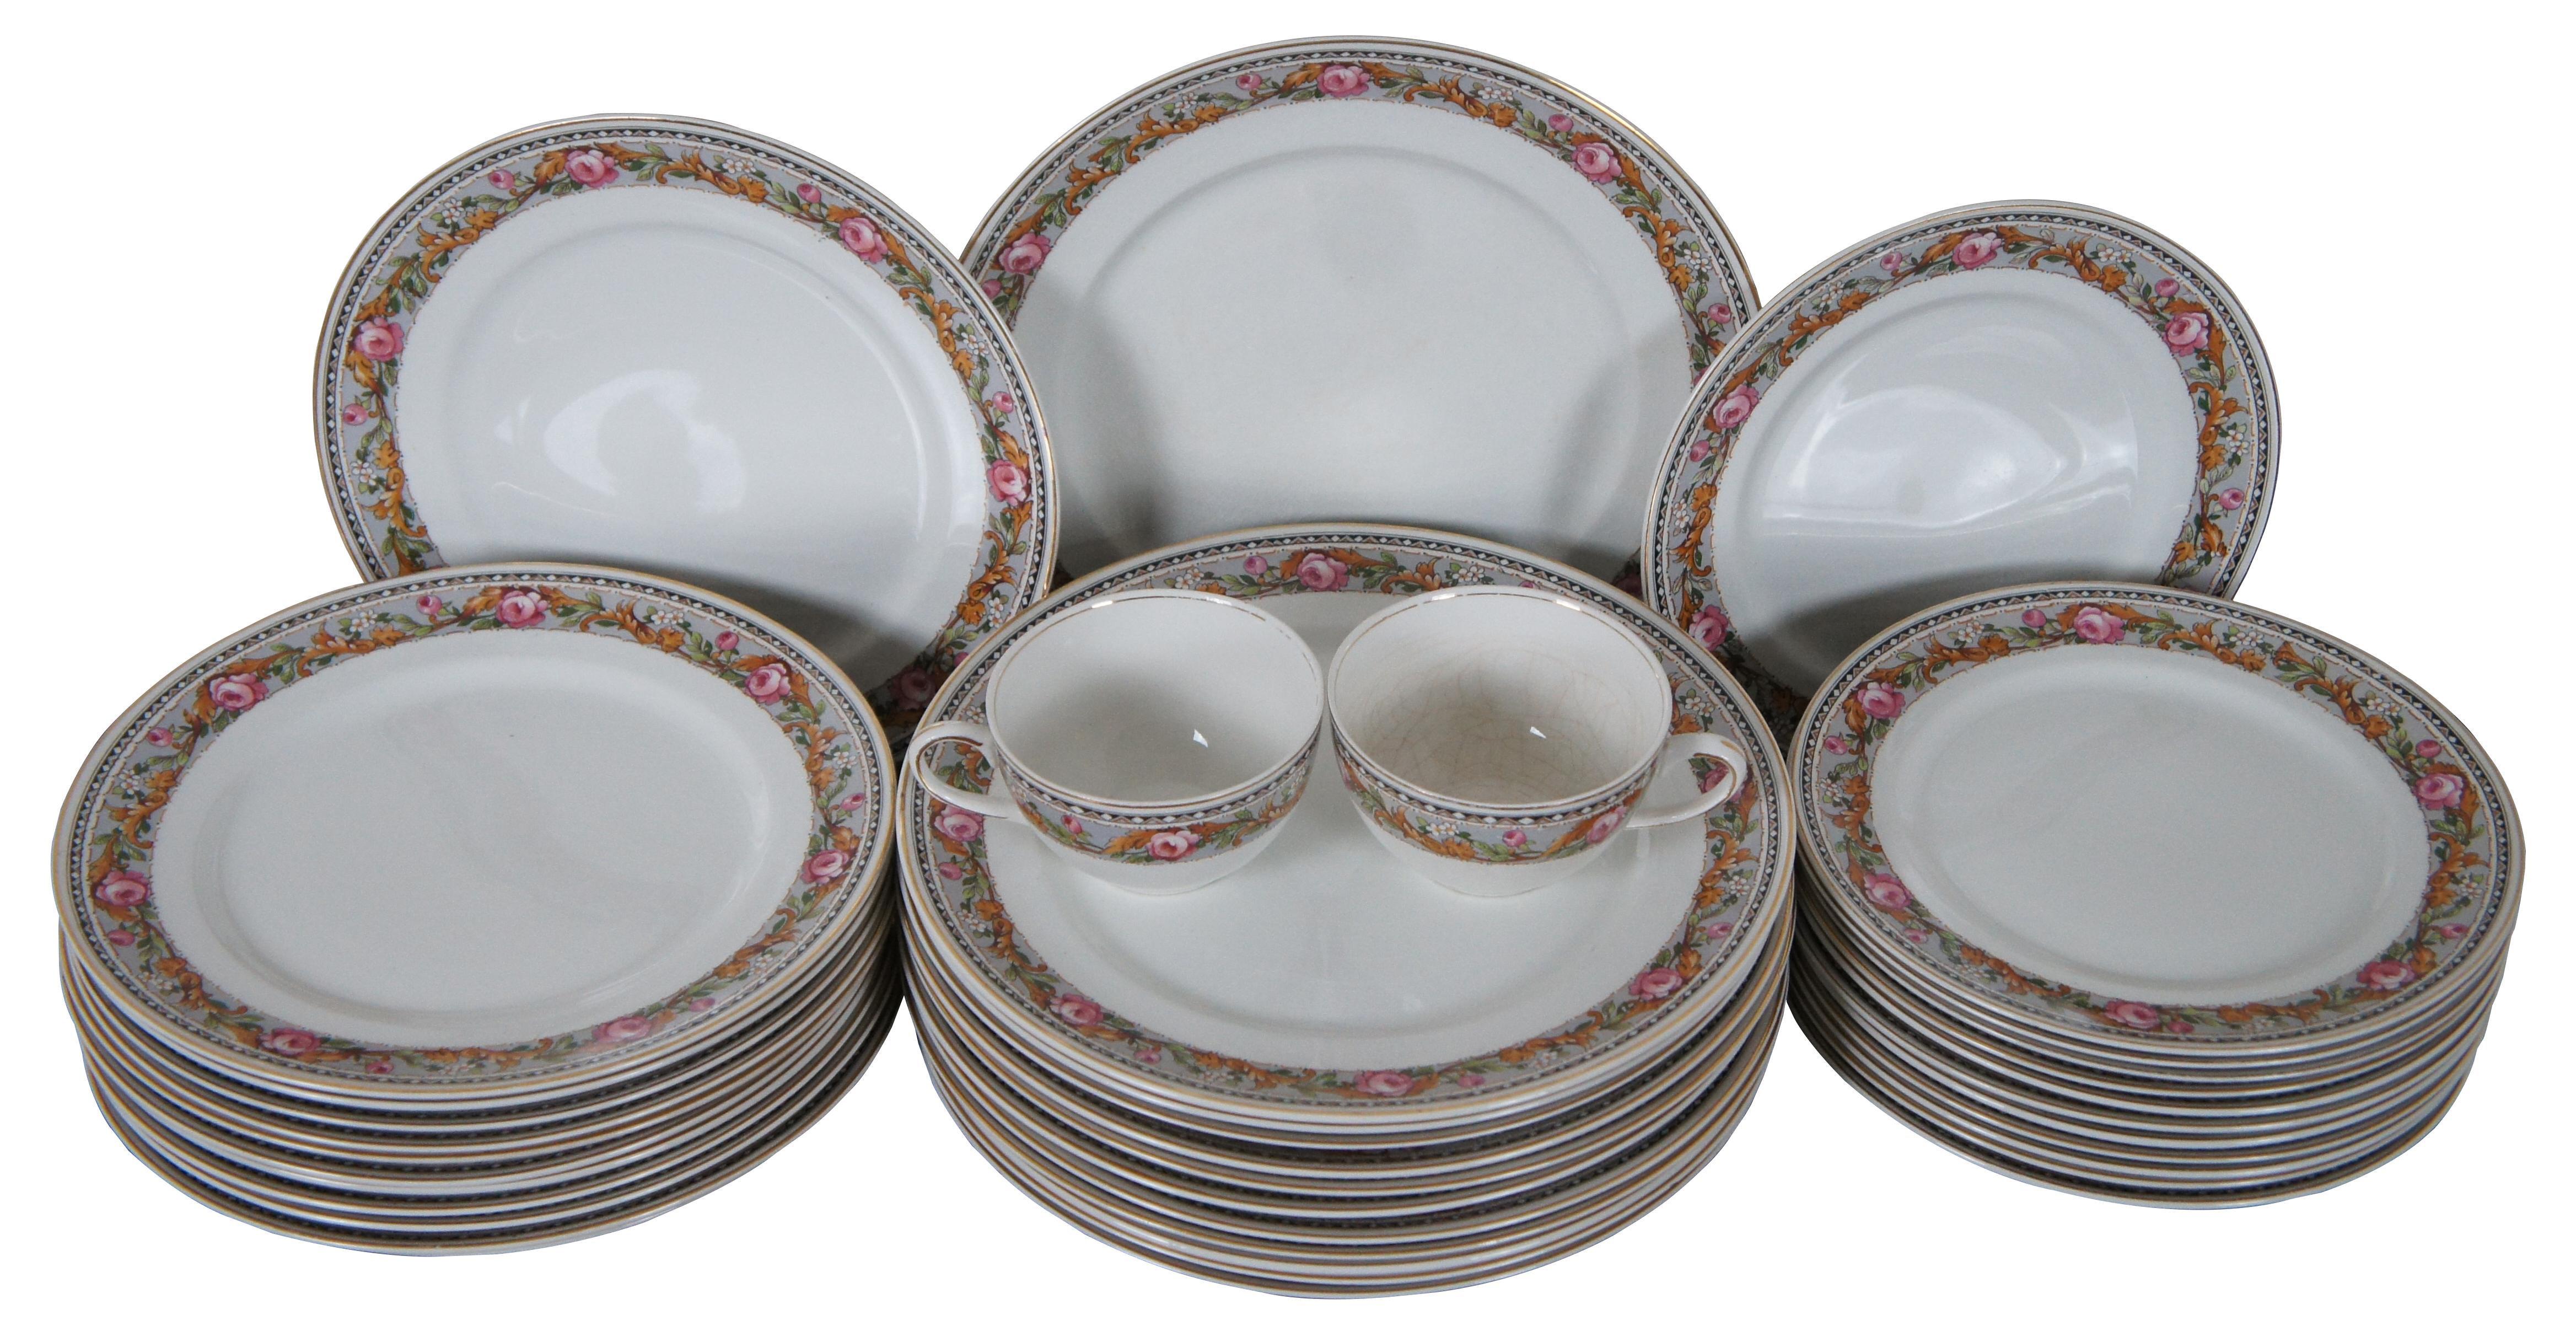 38 Pieces of vintage Alfred Meakin England dinnerware featuring dinner, salad, bread plates and two teacups. Design features gray borders with green and orange floral foliate design accented by pink roses. Marked on back The Tunis.

12 Dinner